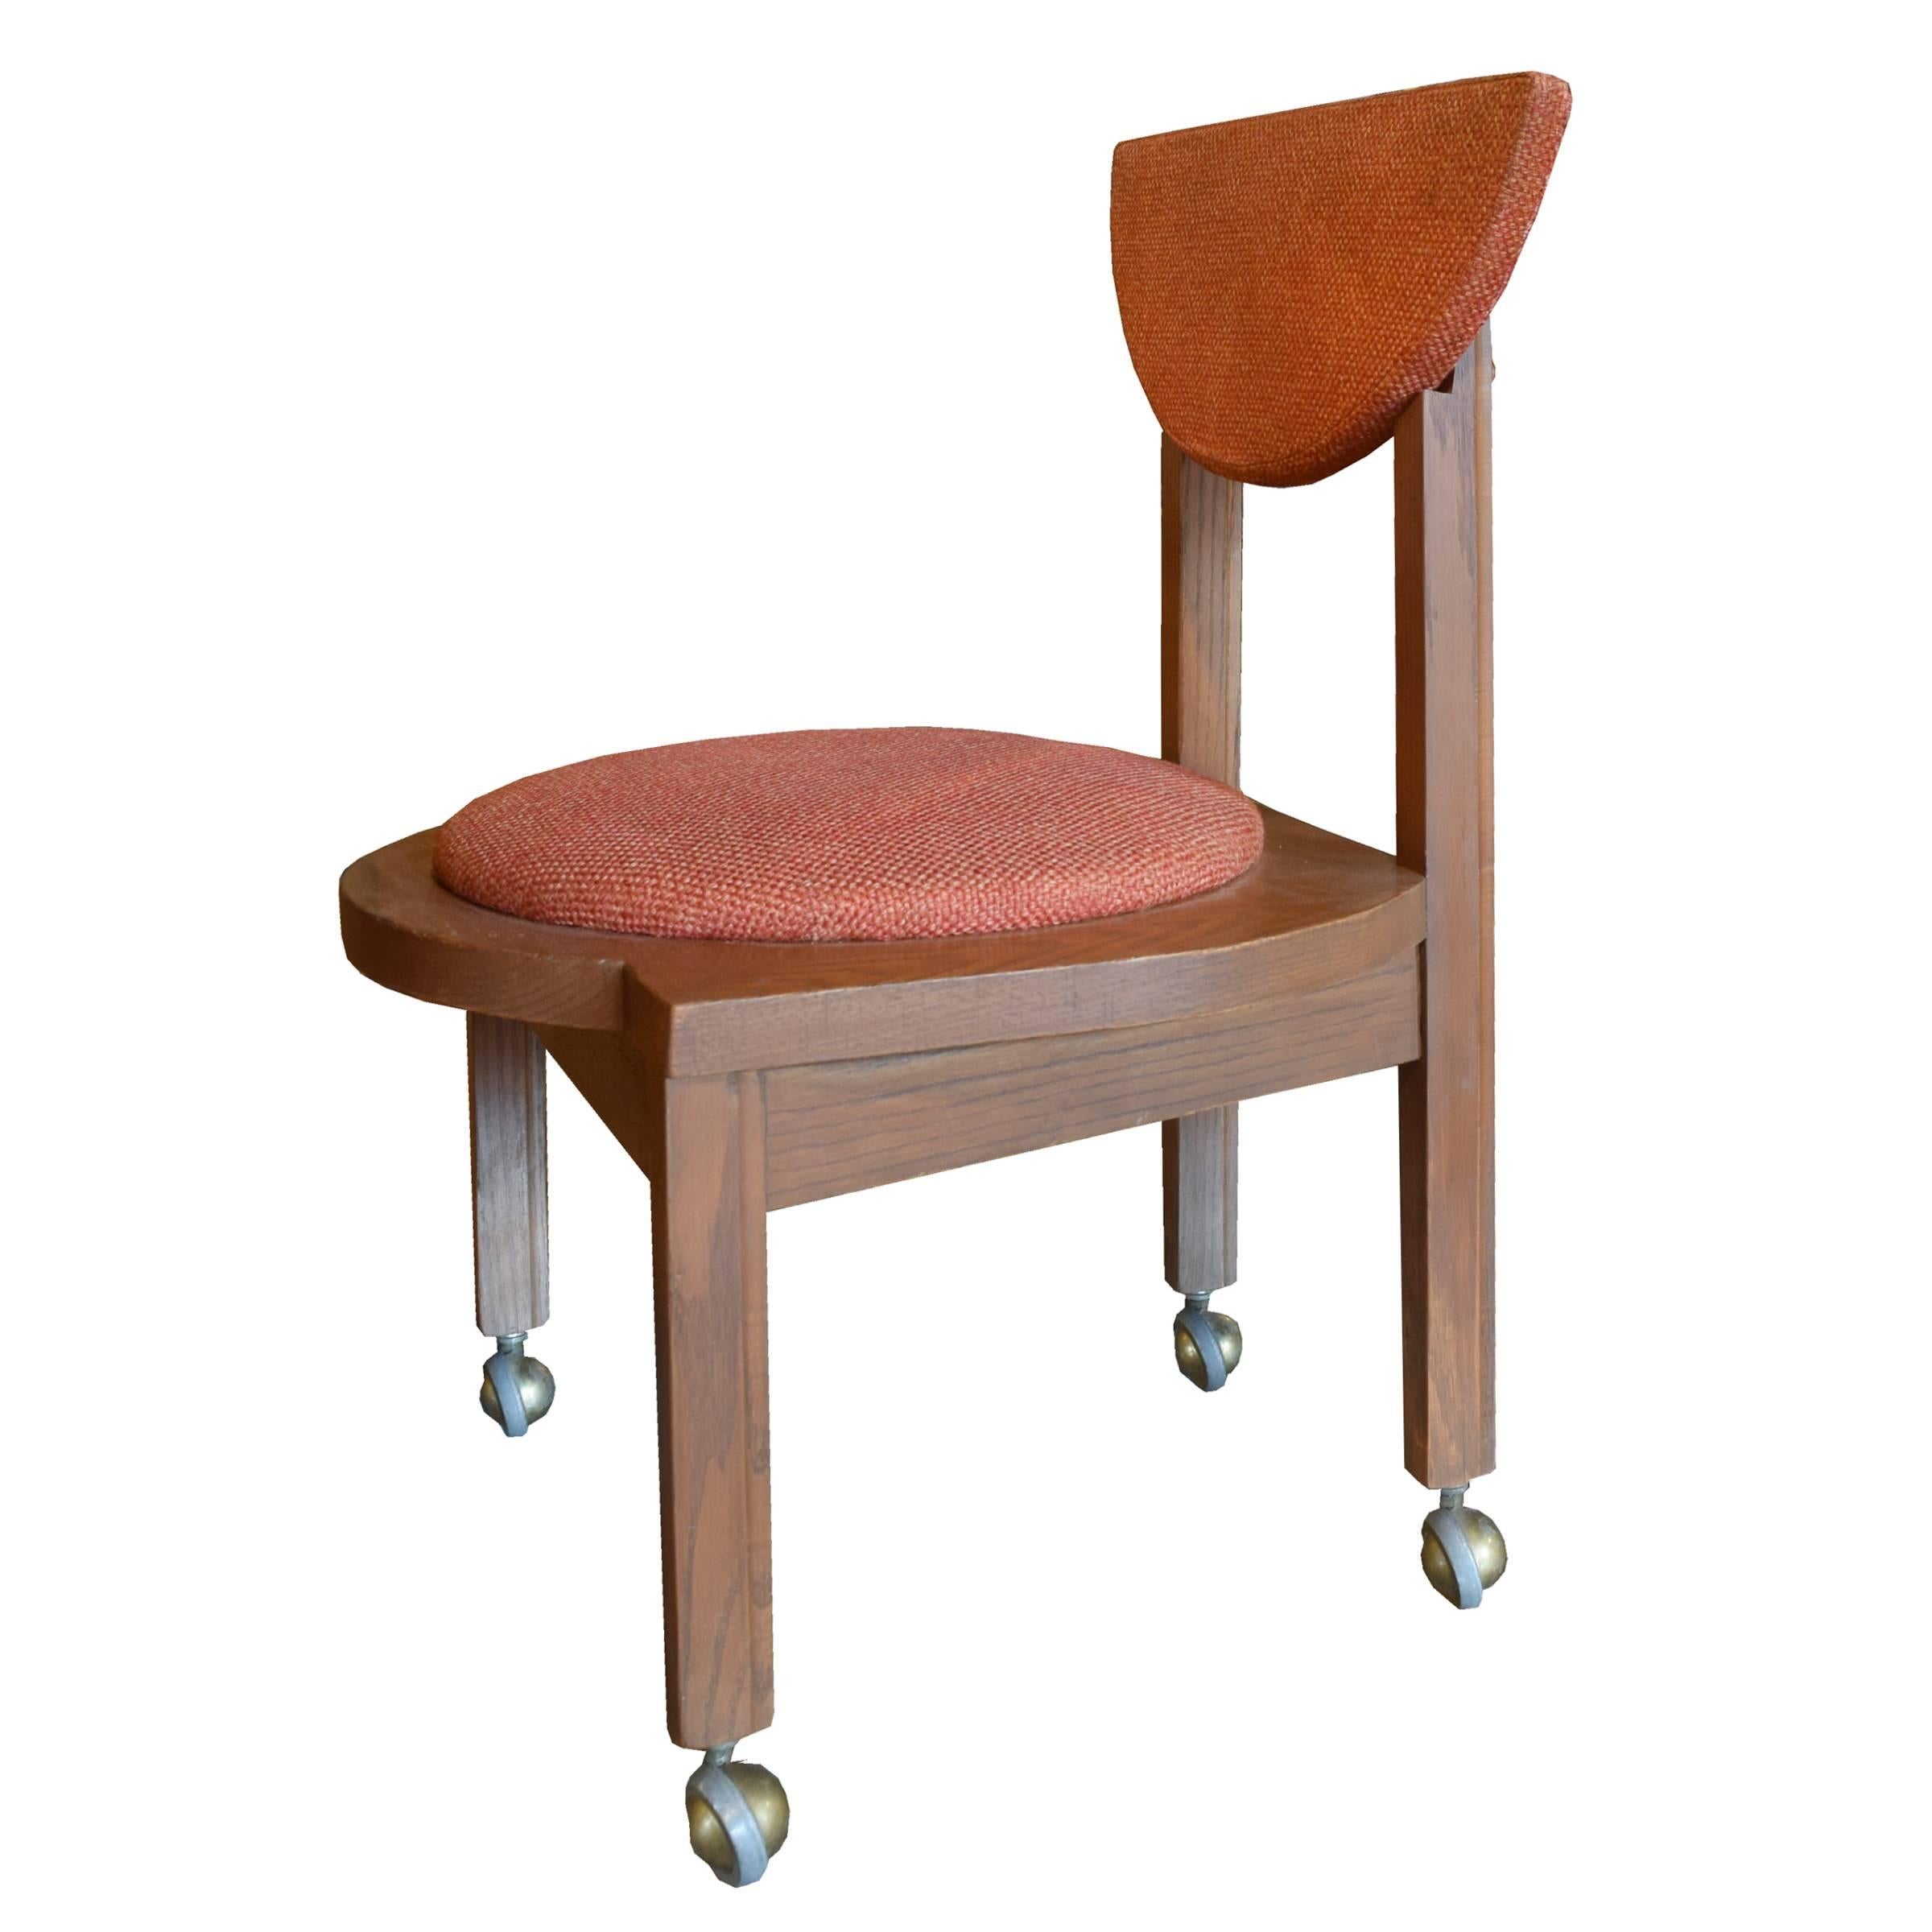 20th Century Pair of Frank Lloyd Wright Designed Side Chairs, 1953